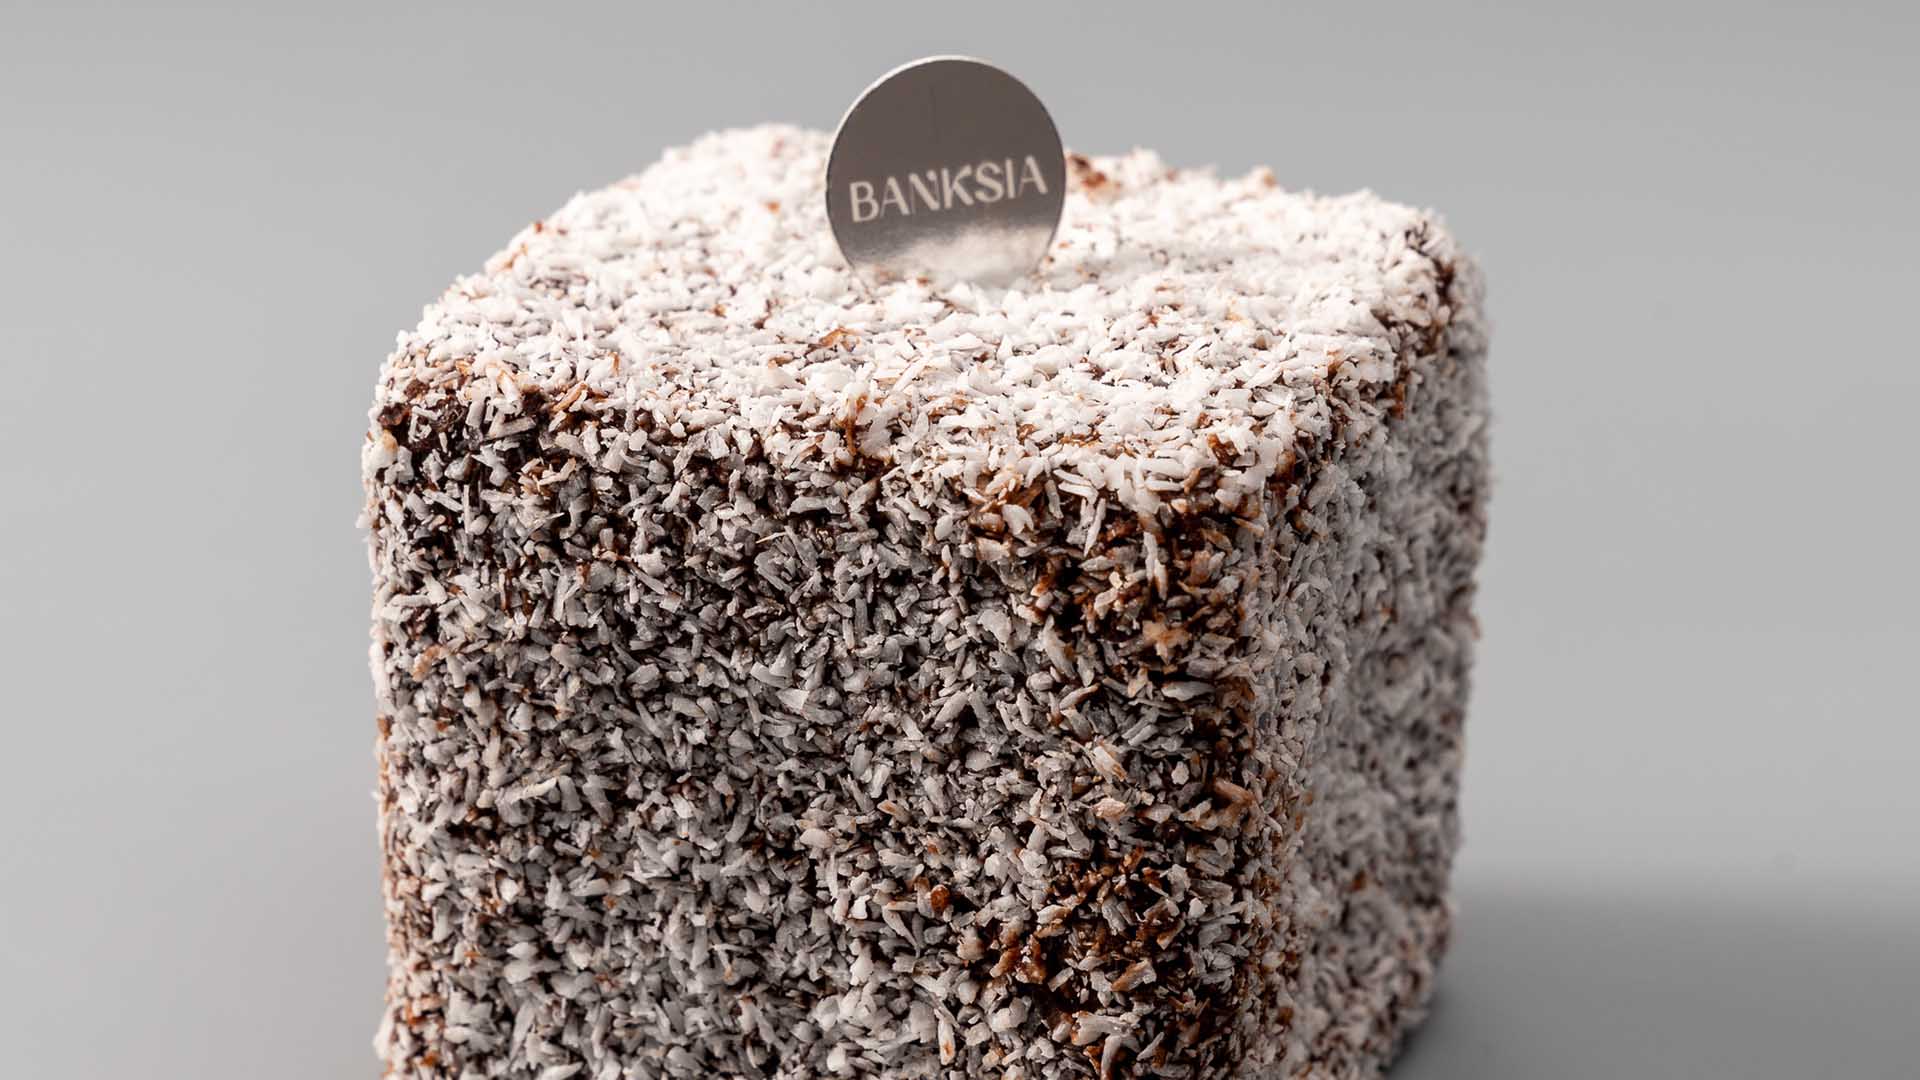 Banksia Bakehouse's Cube-Shaped Lamington Croissant Is the Next OTT Dessert You Need to Try